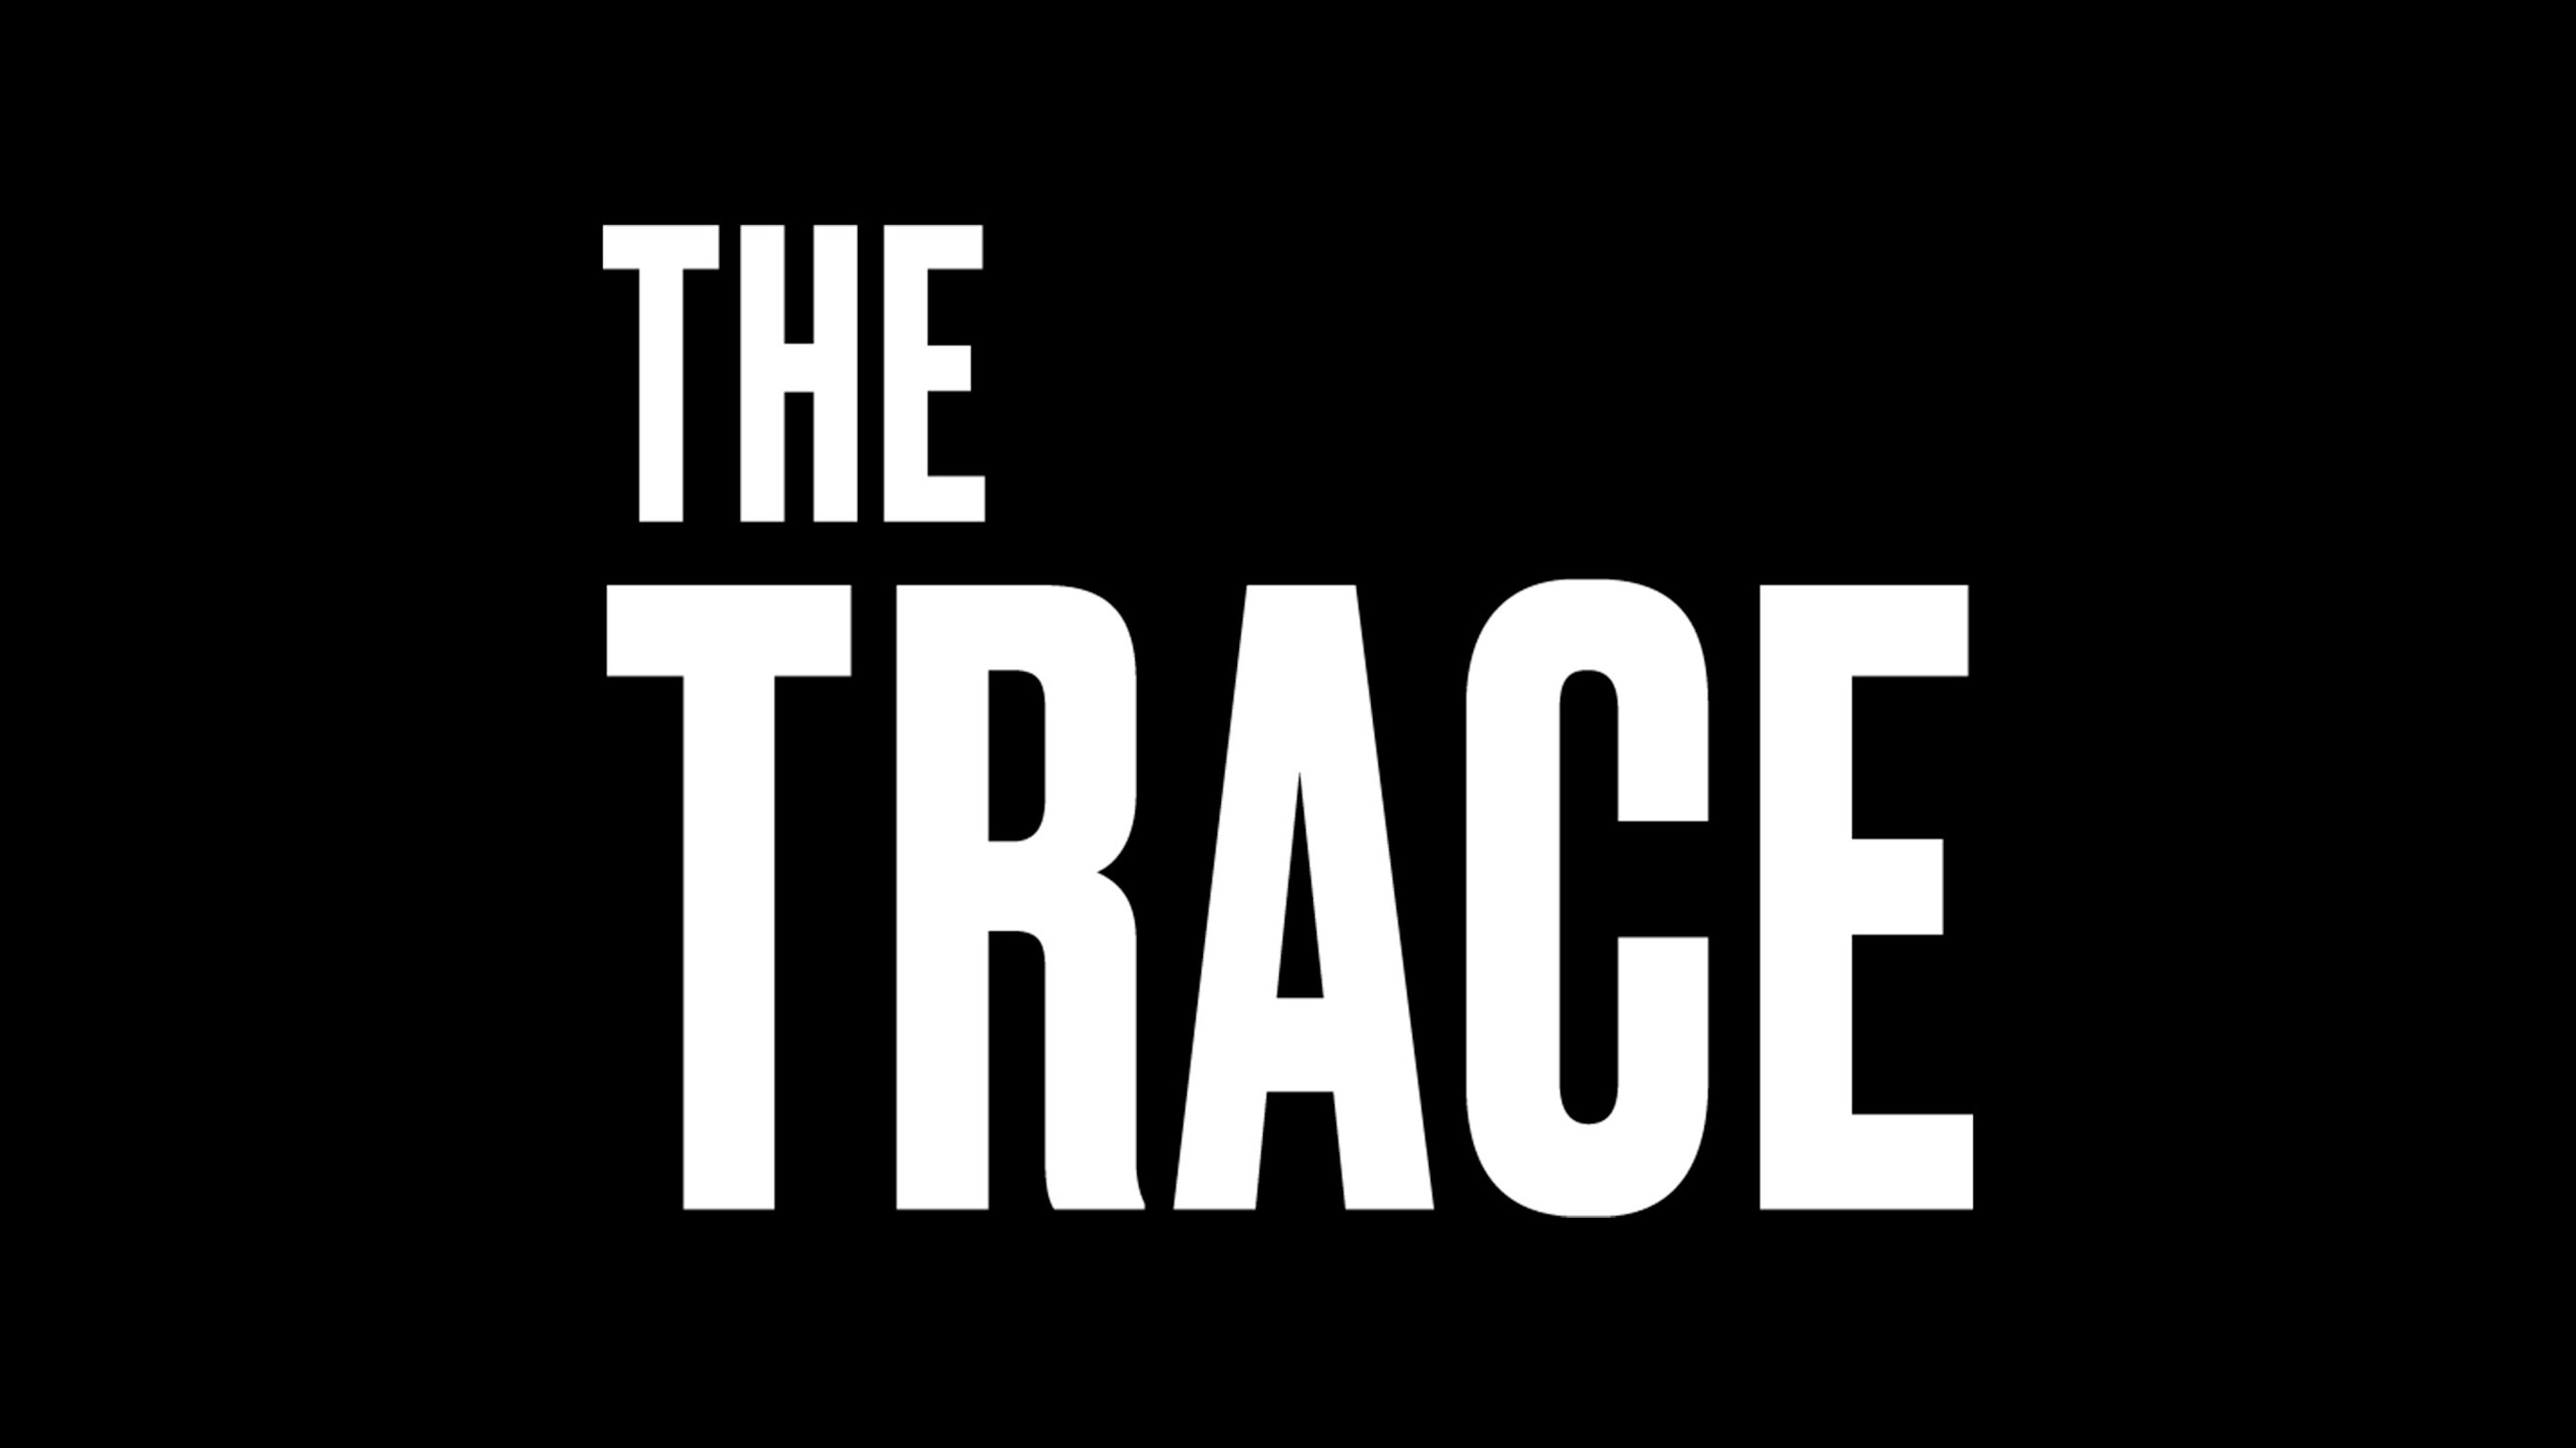 Black background with "The Trace" written in white